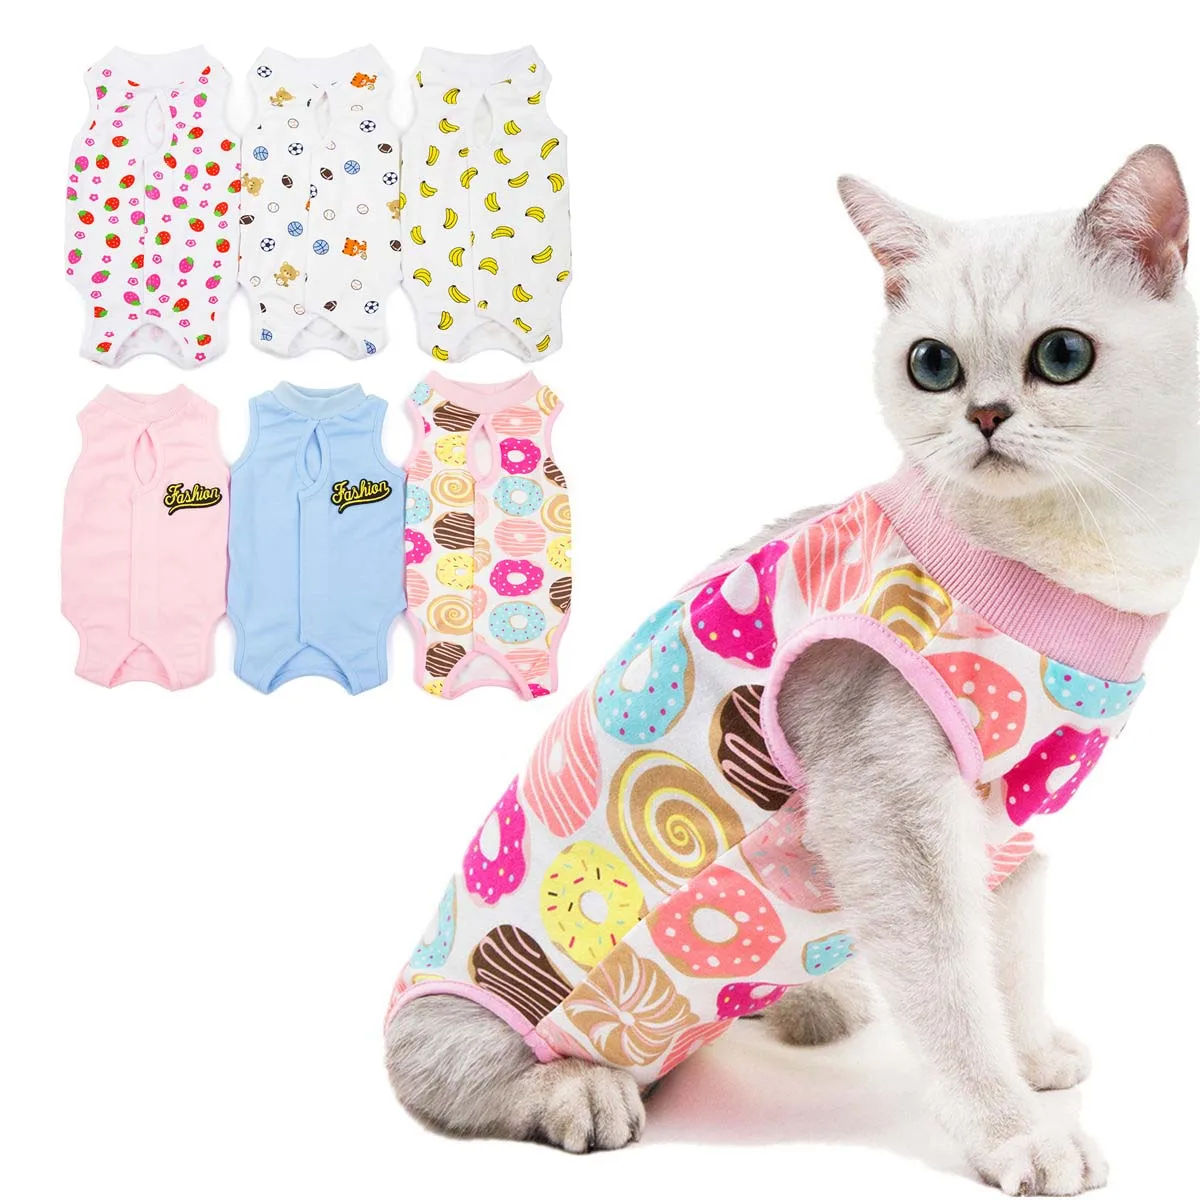 Cotton Cat Clothes Recovery Suit Cotton Cat Weaning Bodysuit After Surgery Wear Anti Licking Wounds for Small Dogs Female Cat dogs surgery clothes camouflage pet bodysuits dog recovery shirt prevent licking wounds dog jumpsuits dog cat medical clothes